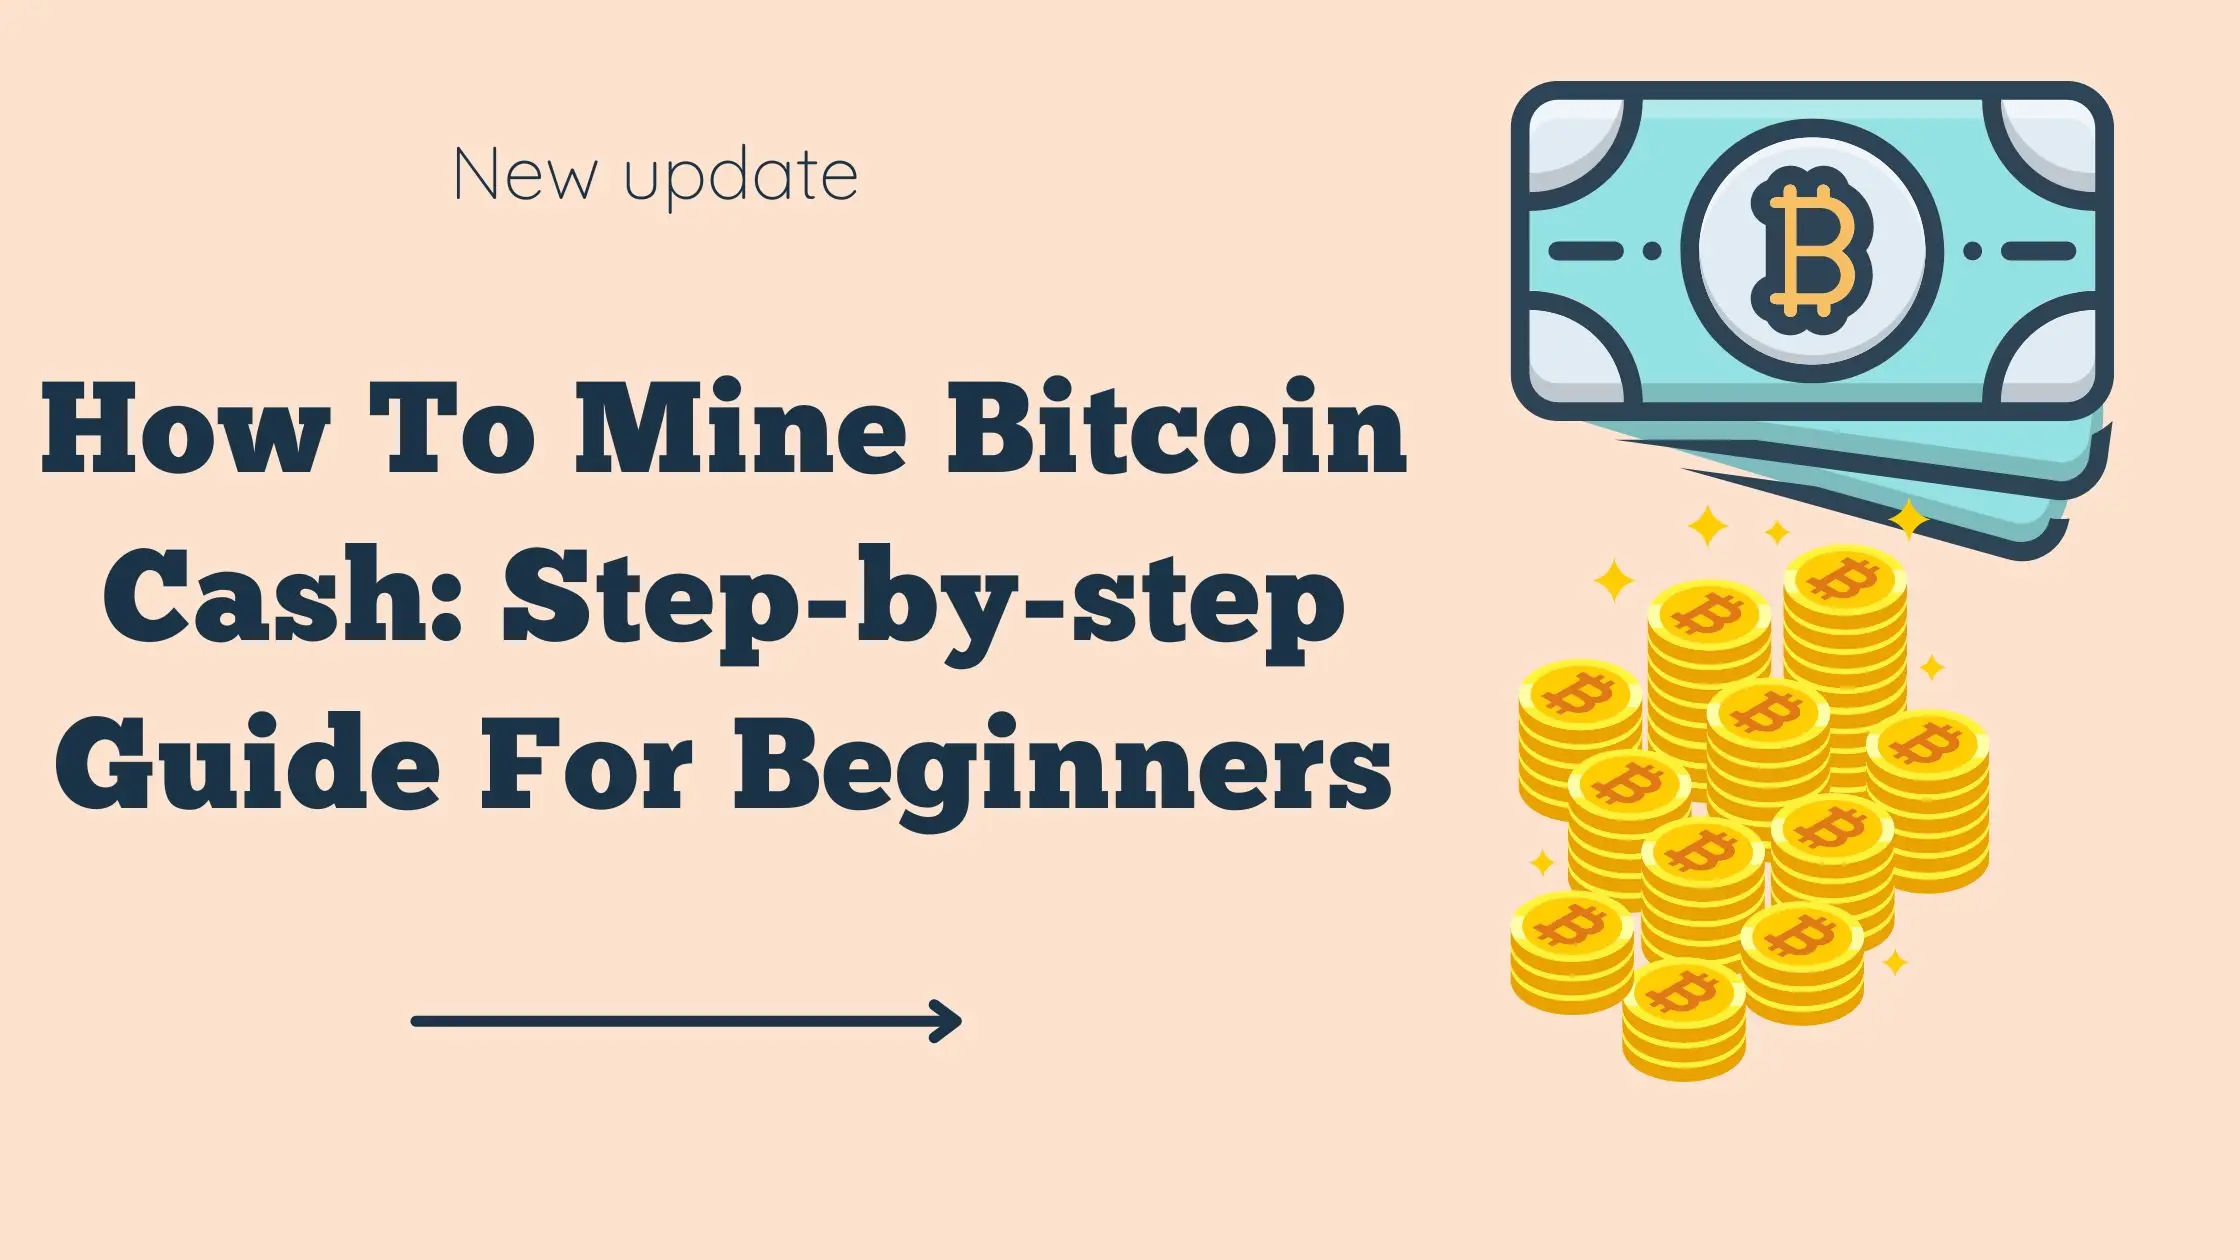 How To Mine Bitcoin Cash: Step-by-step Guide For Beginners